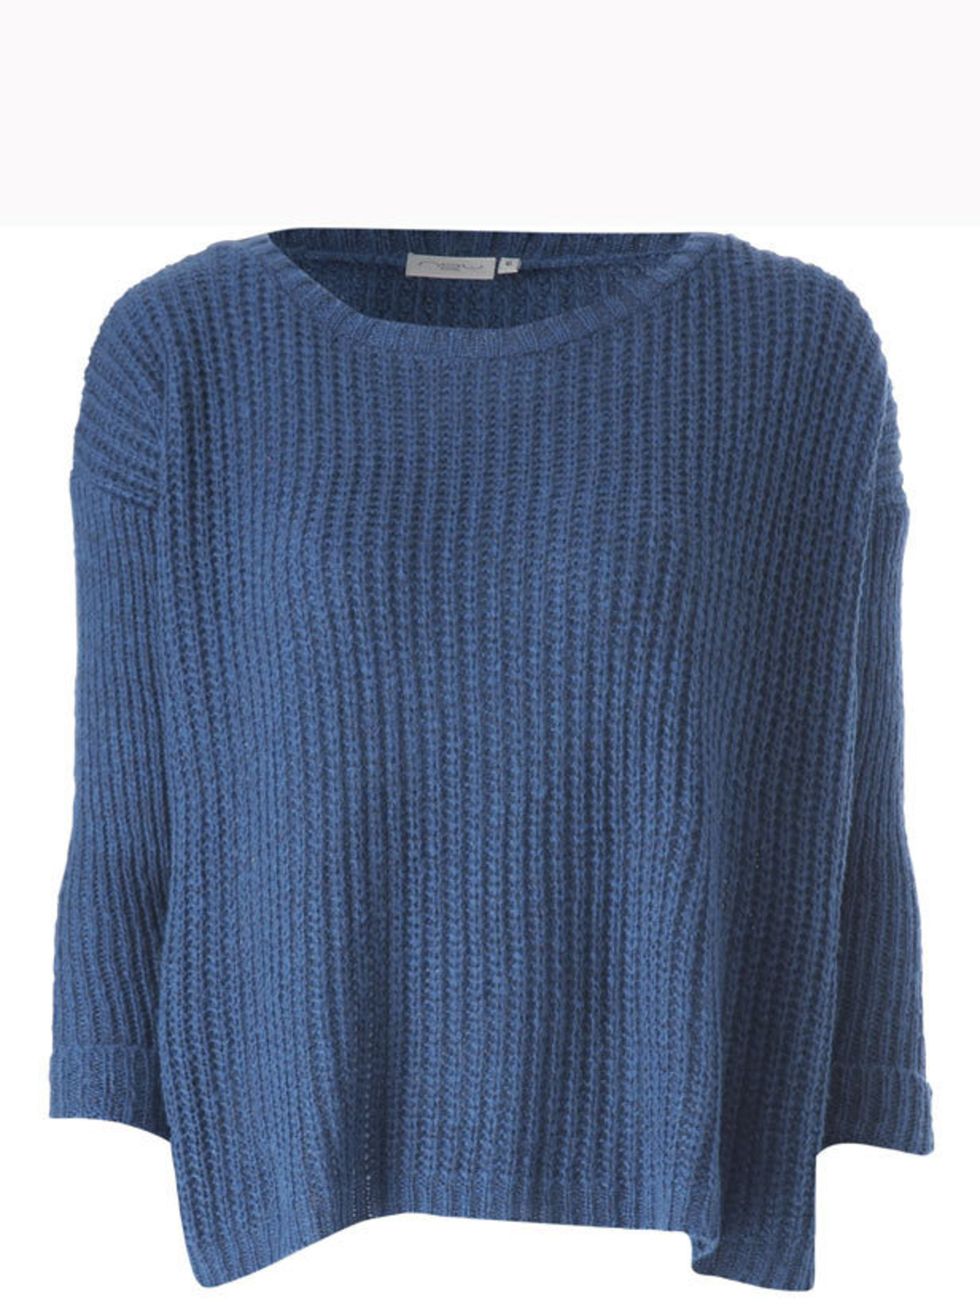 <p><a href="http://www.newlook.com/shop/womens/knitwear/knitted-boxy-jumper_214677046">New Look</a> knitted jumper, £24.99</p>